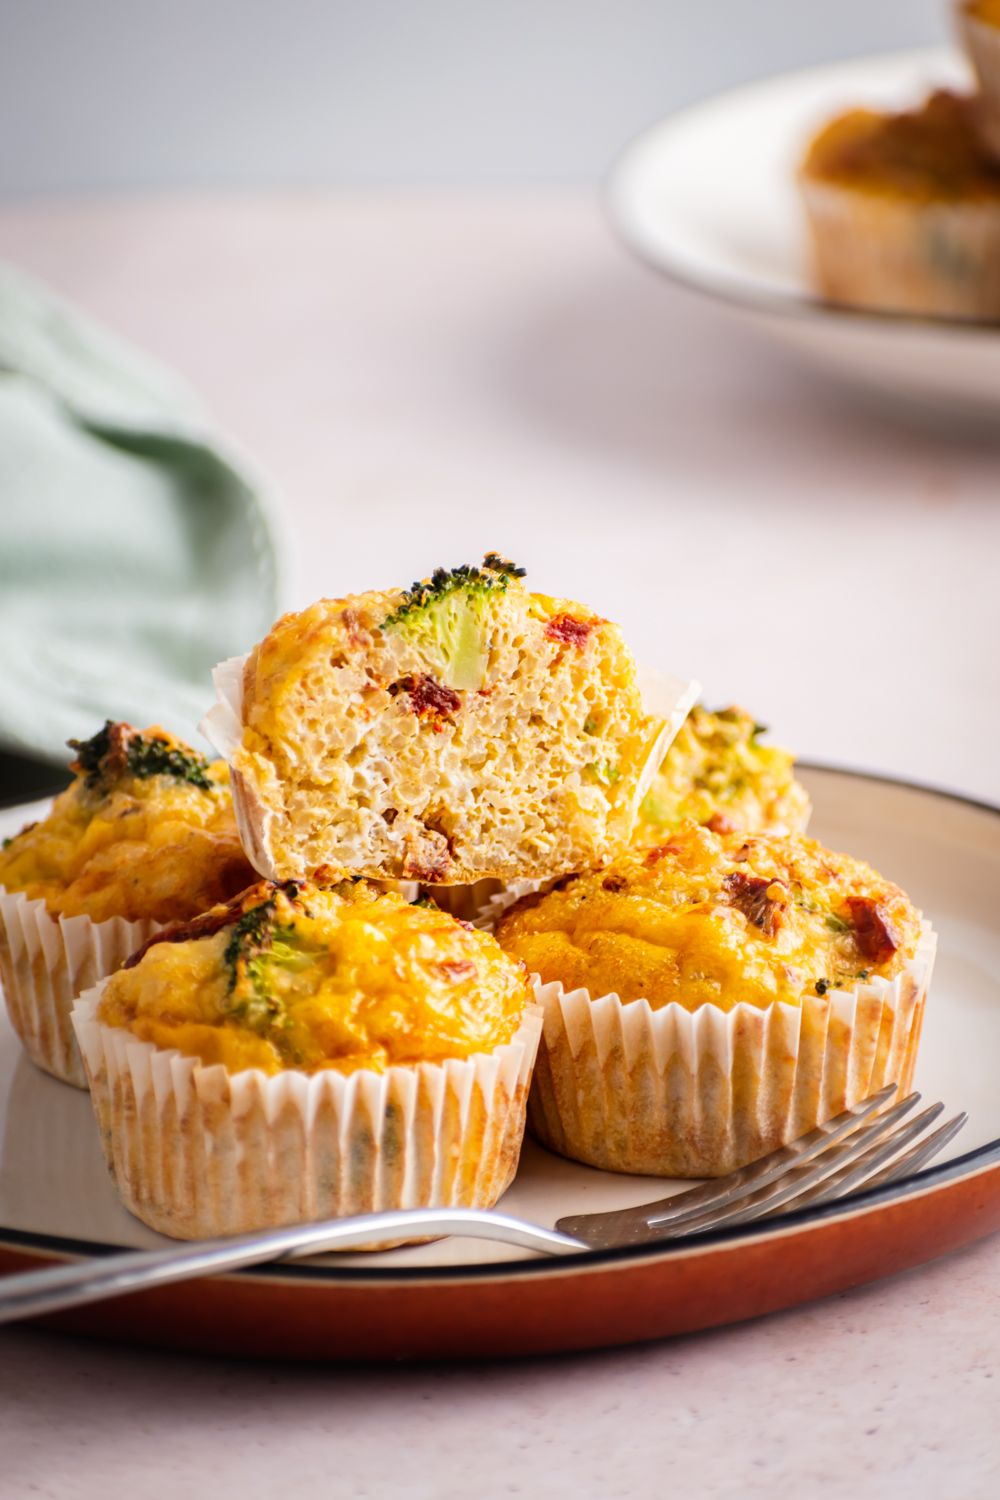 Egg muffins with quinoa, broccoli, and sundried tomatoes on a plate.